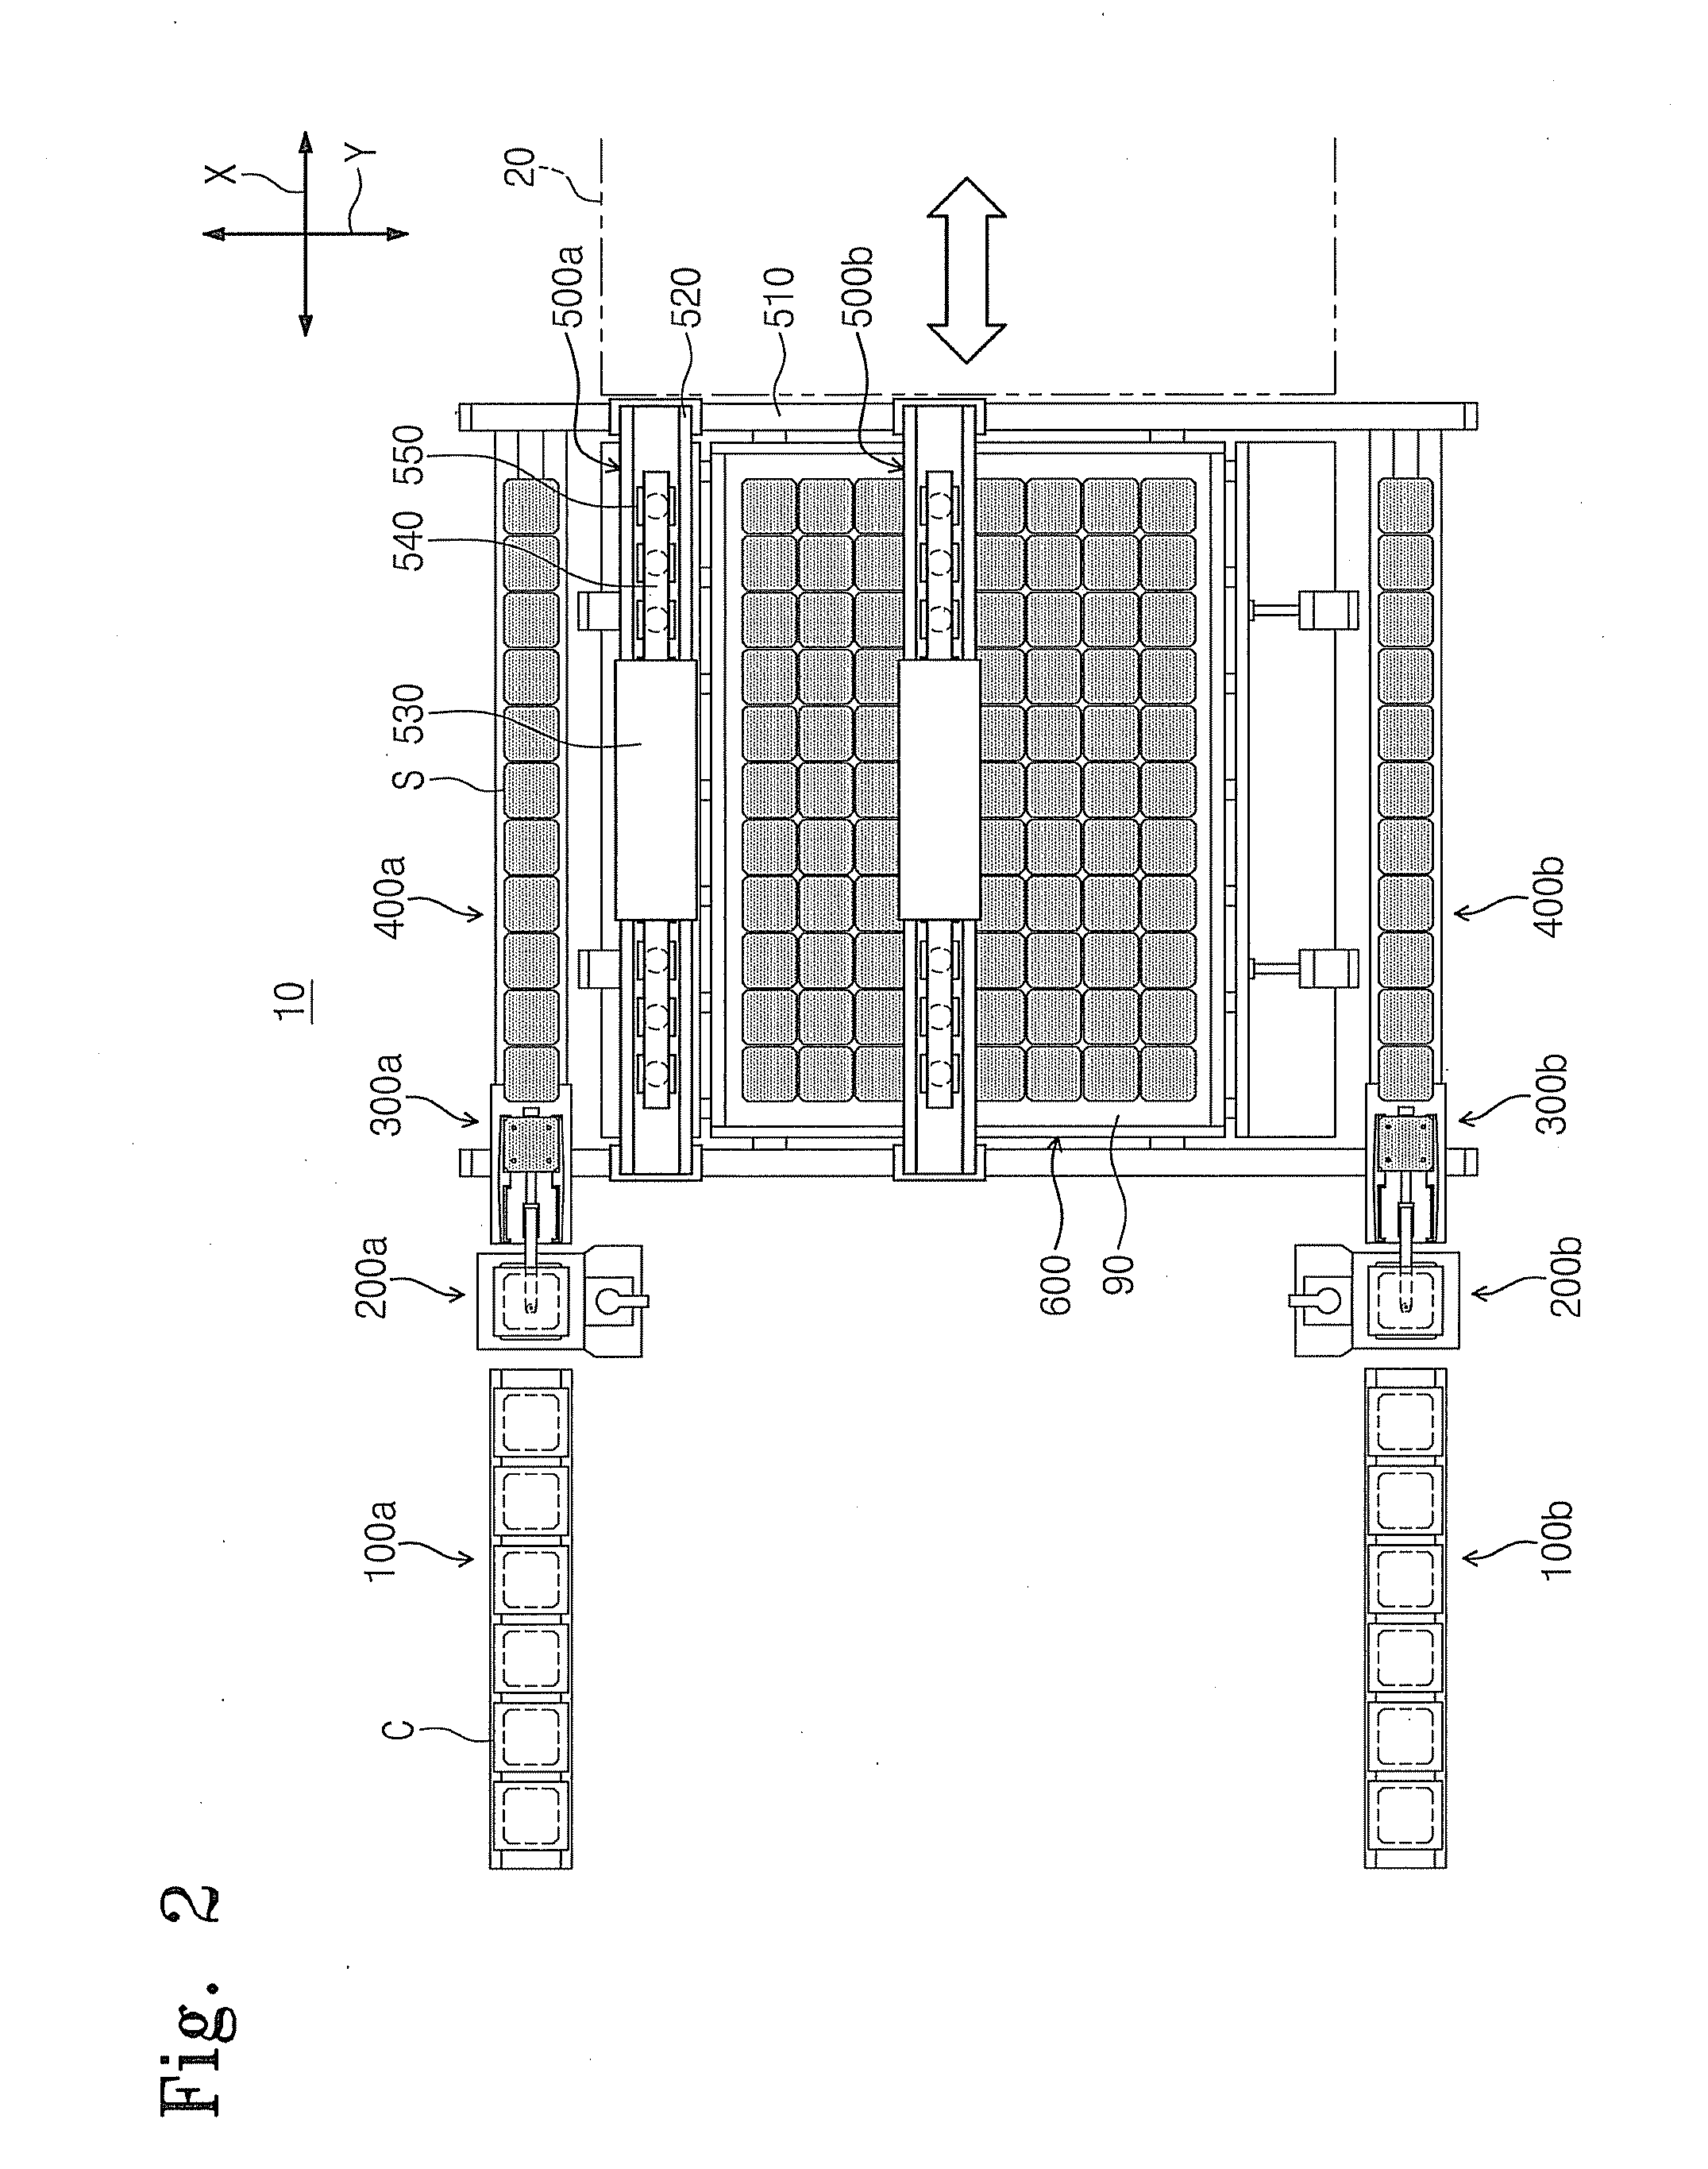 Substrate Processing Apparatus And Method For Loading And Unloading Substrates